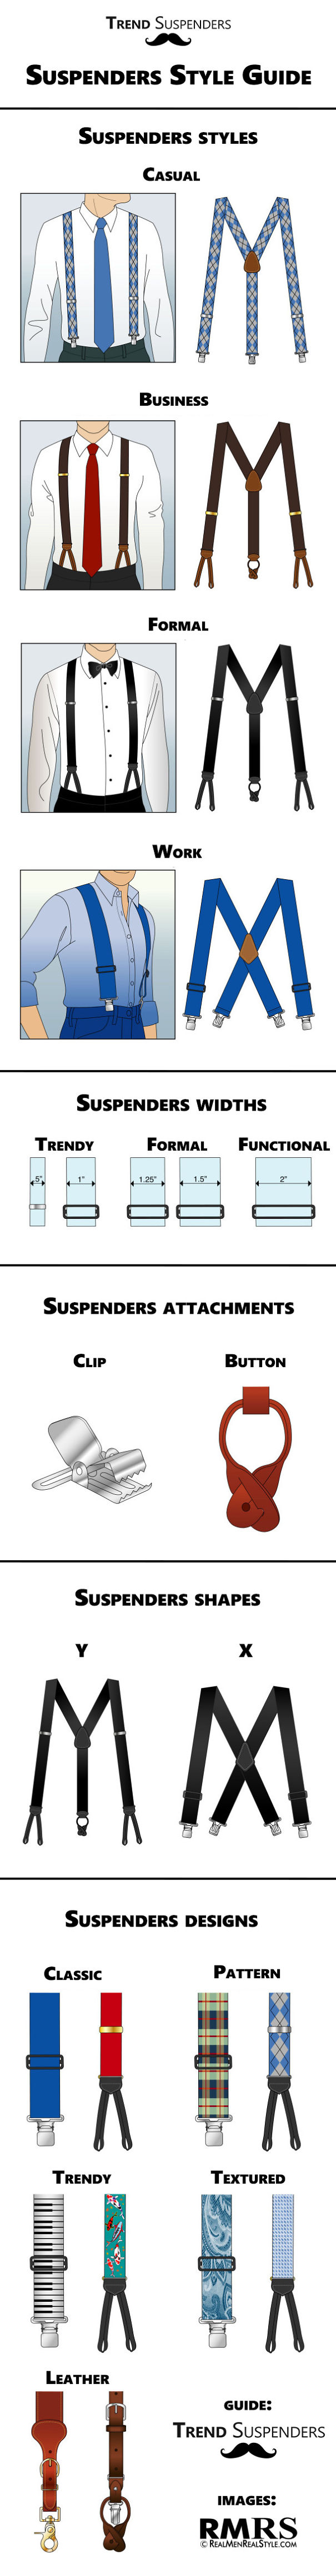 suspenders Style Guide Infographic